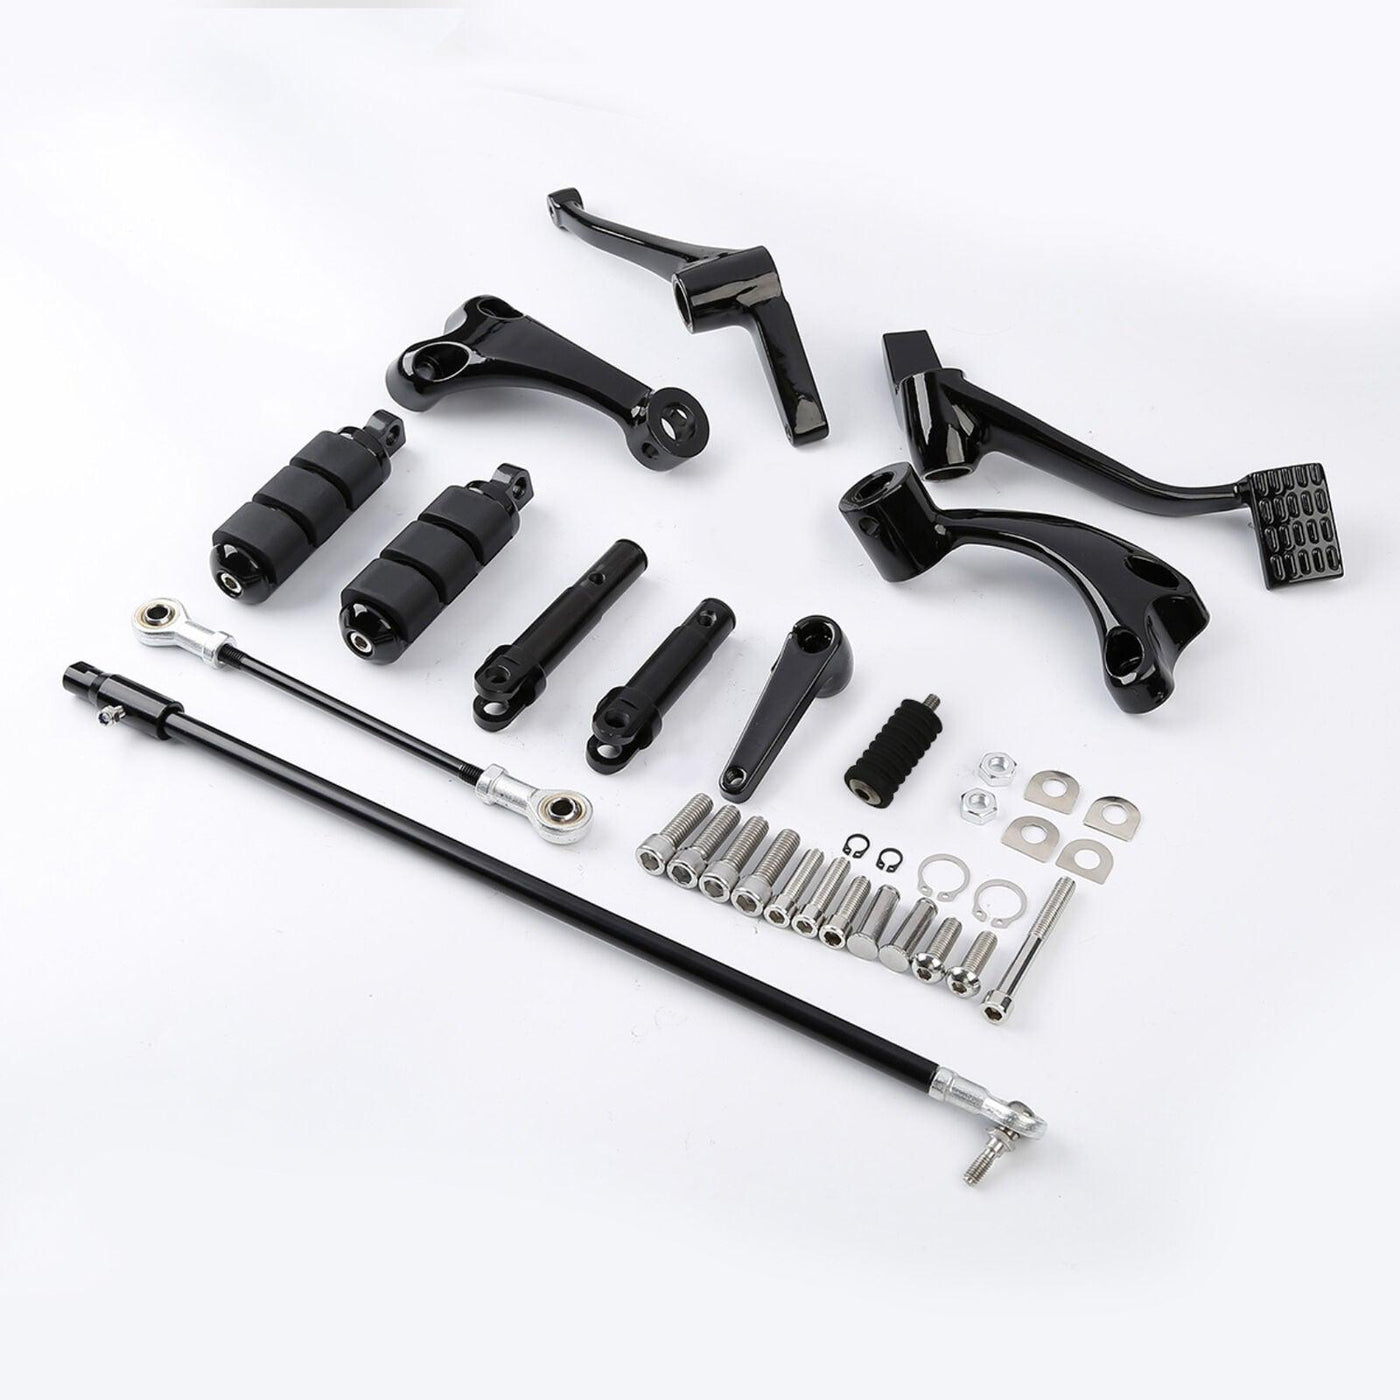 Forward Controls Pegs Levers Linkages For Harley Sportster XL 883 1200 48 72 New - Moto Life Products